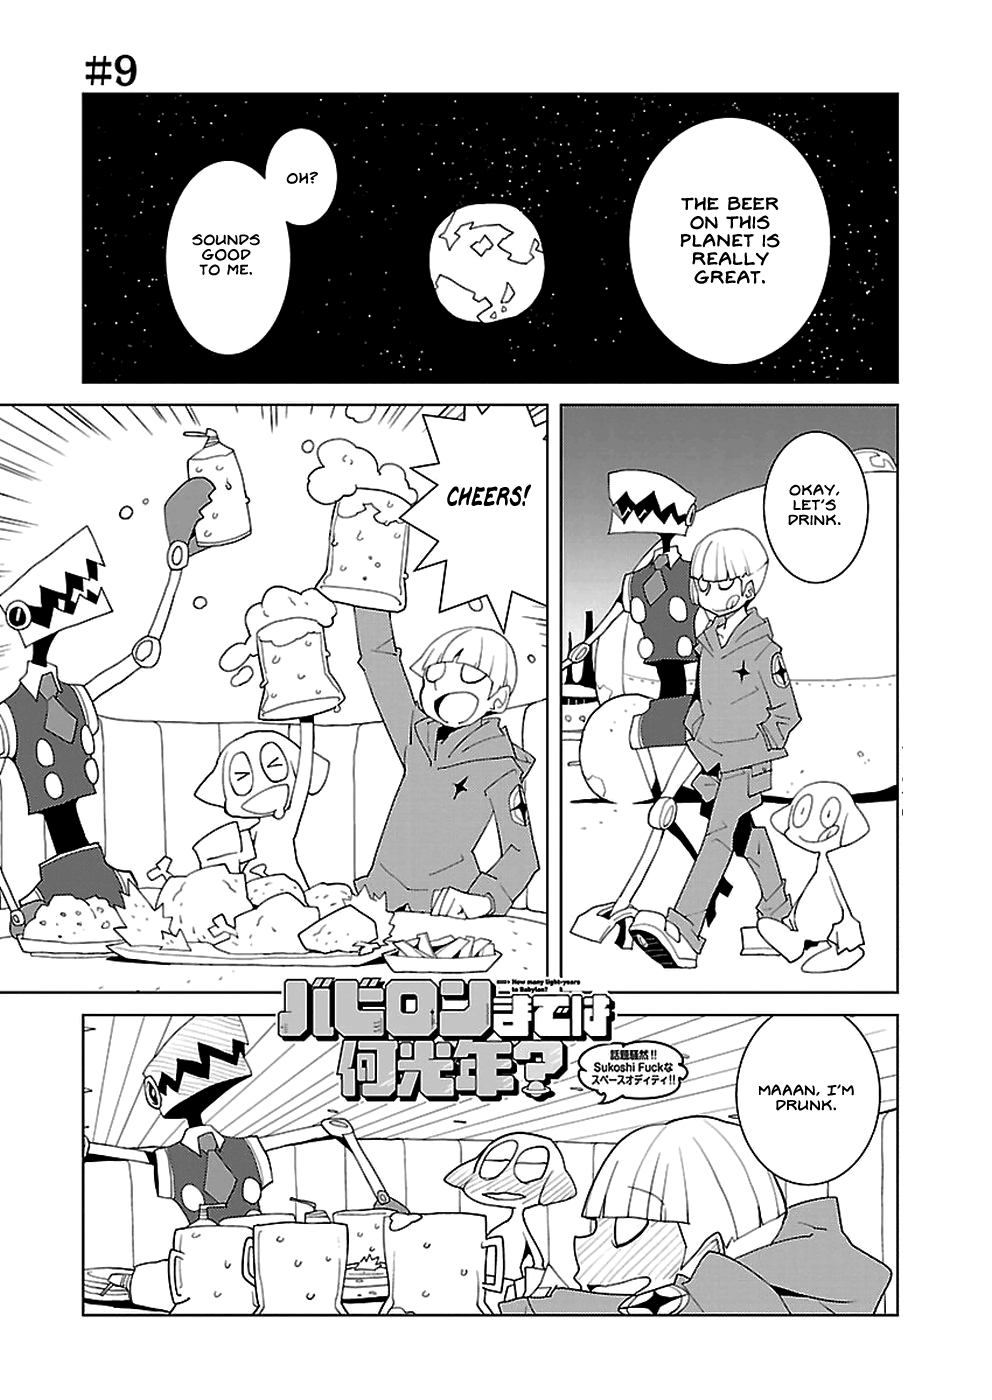 How Many Light Years to Babylon? Vol. 1 Ch. 9